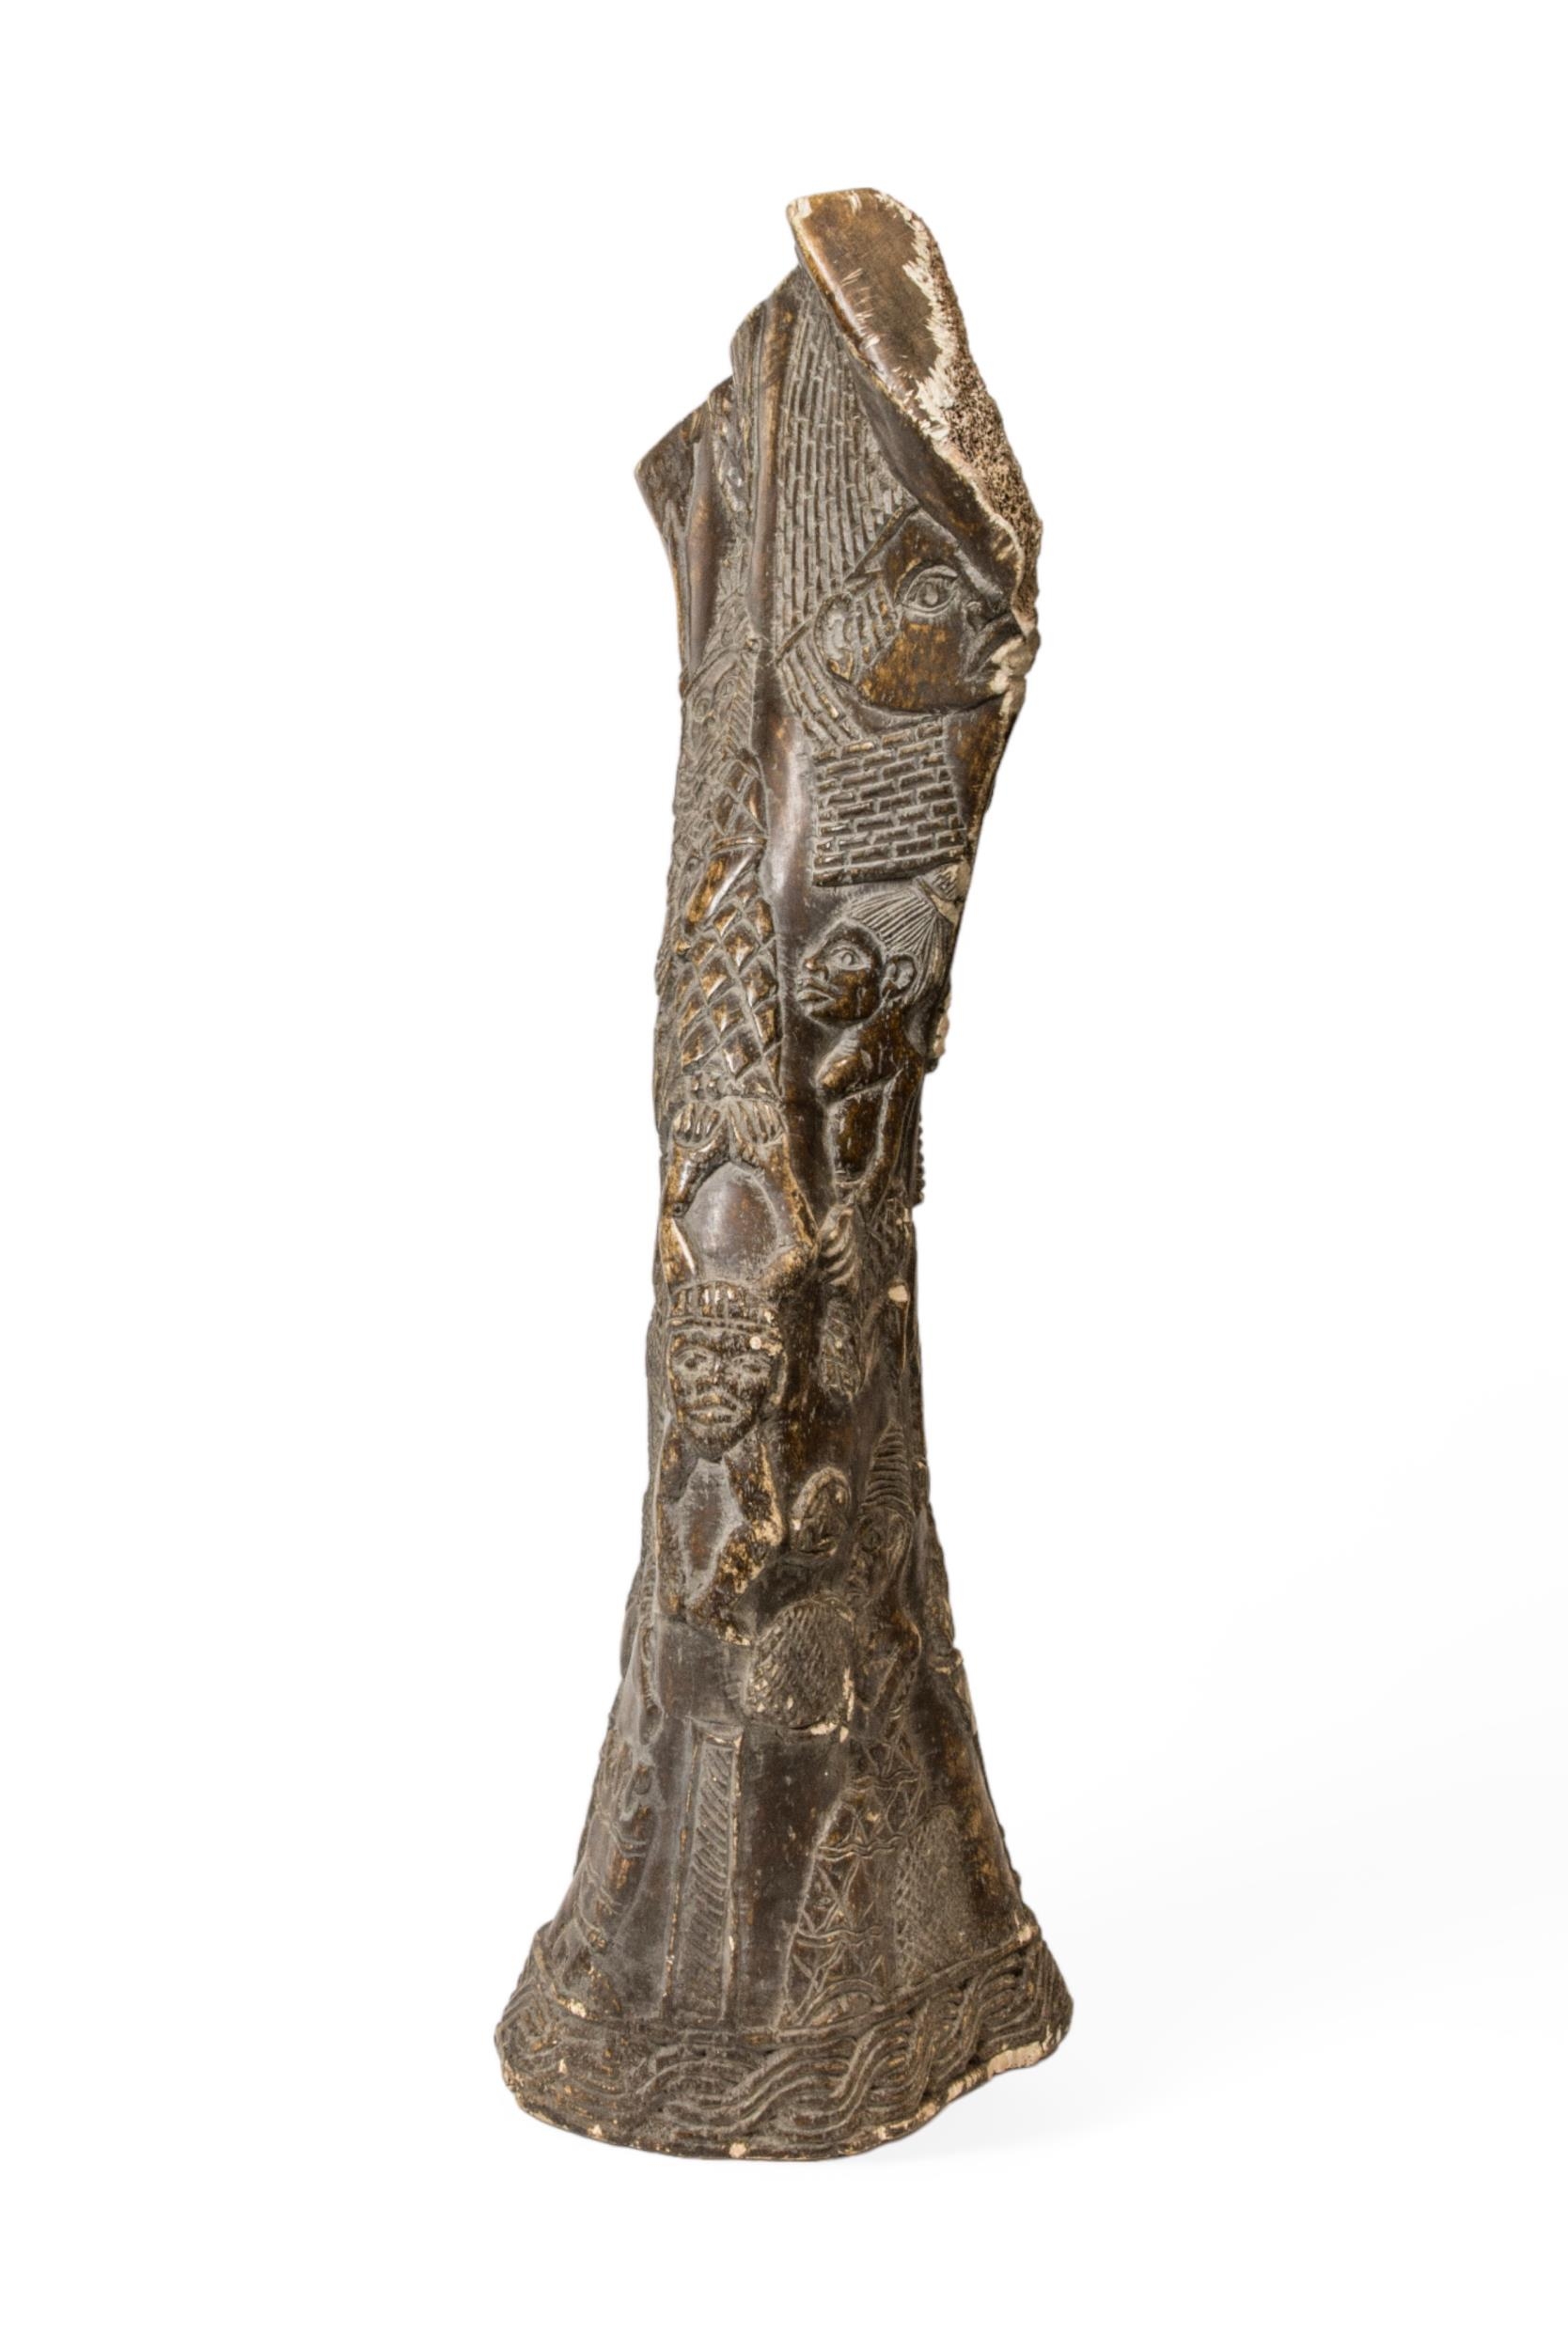 AN ELEPHANT LEG BONE WITH BENIN STYLE CARVINGS OF HIGH STATUS FIGURES 62cm - Image 3 of 3